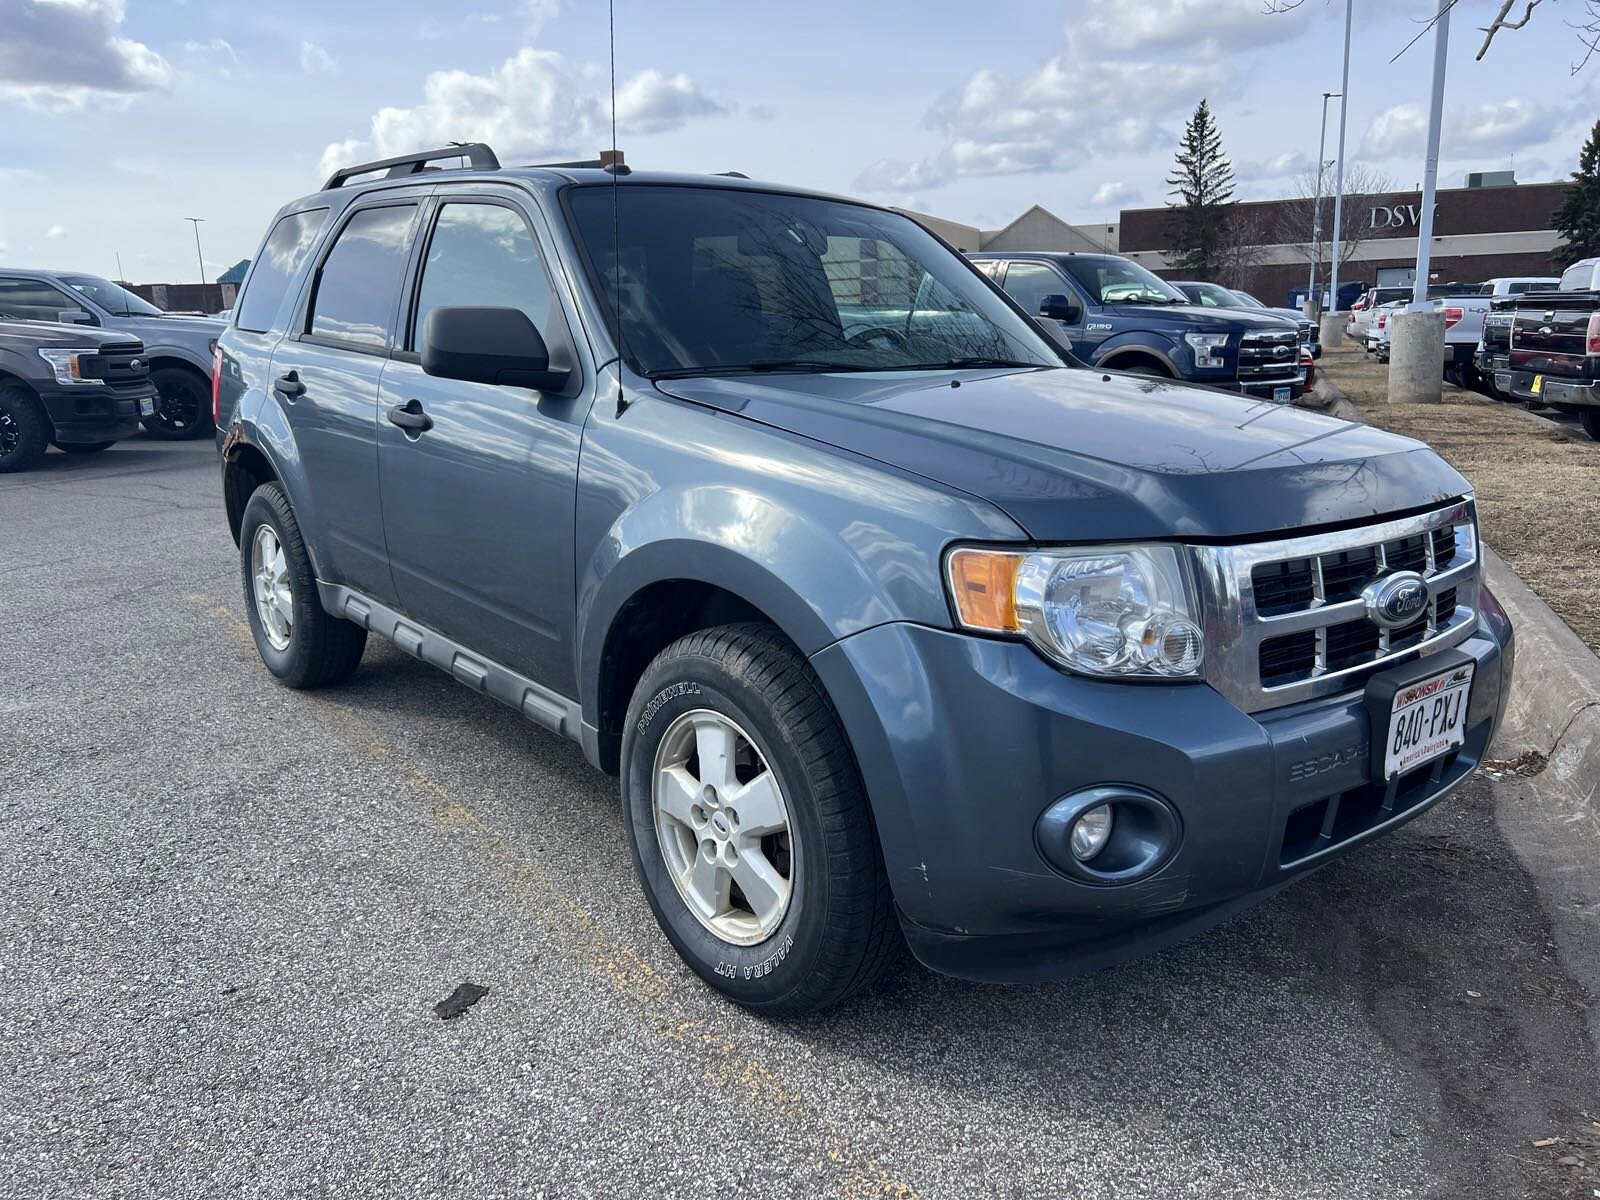 Used 2010 Ford Escape XLT with VIN 1FMCU9DGXAKA10422 for sale in Duluth, Minnesota